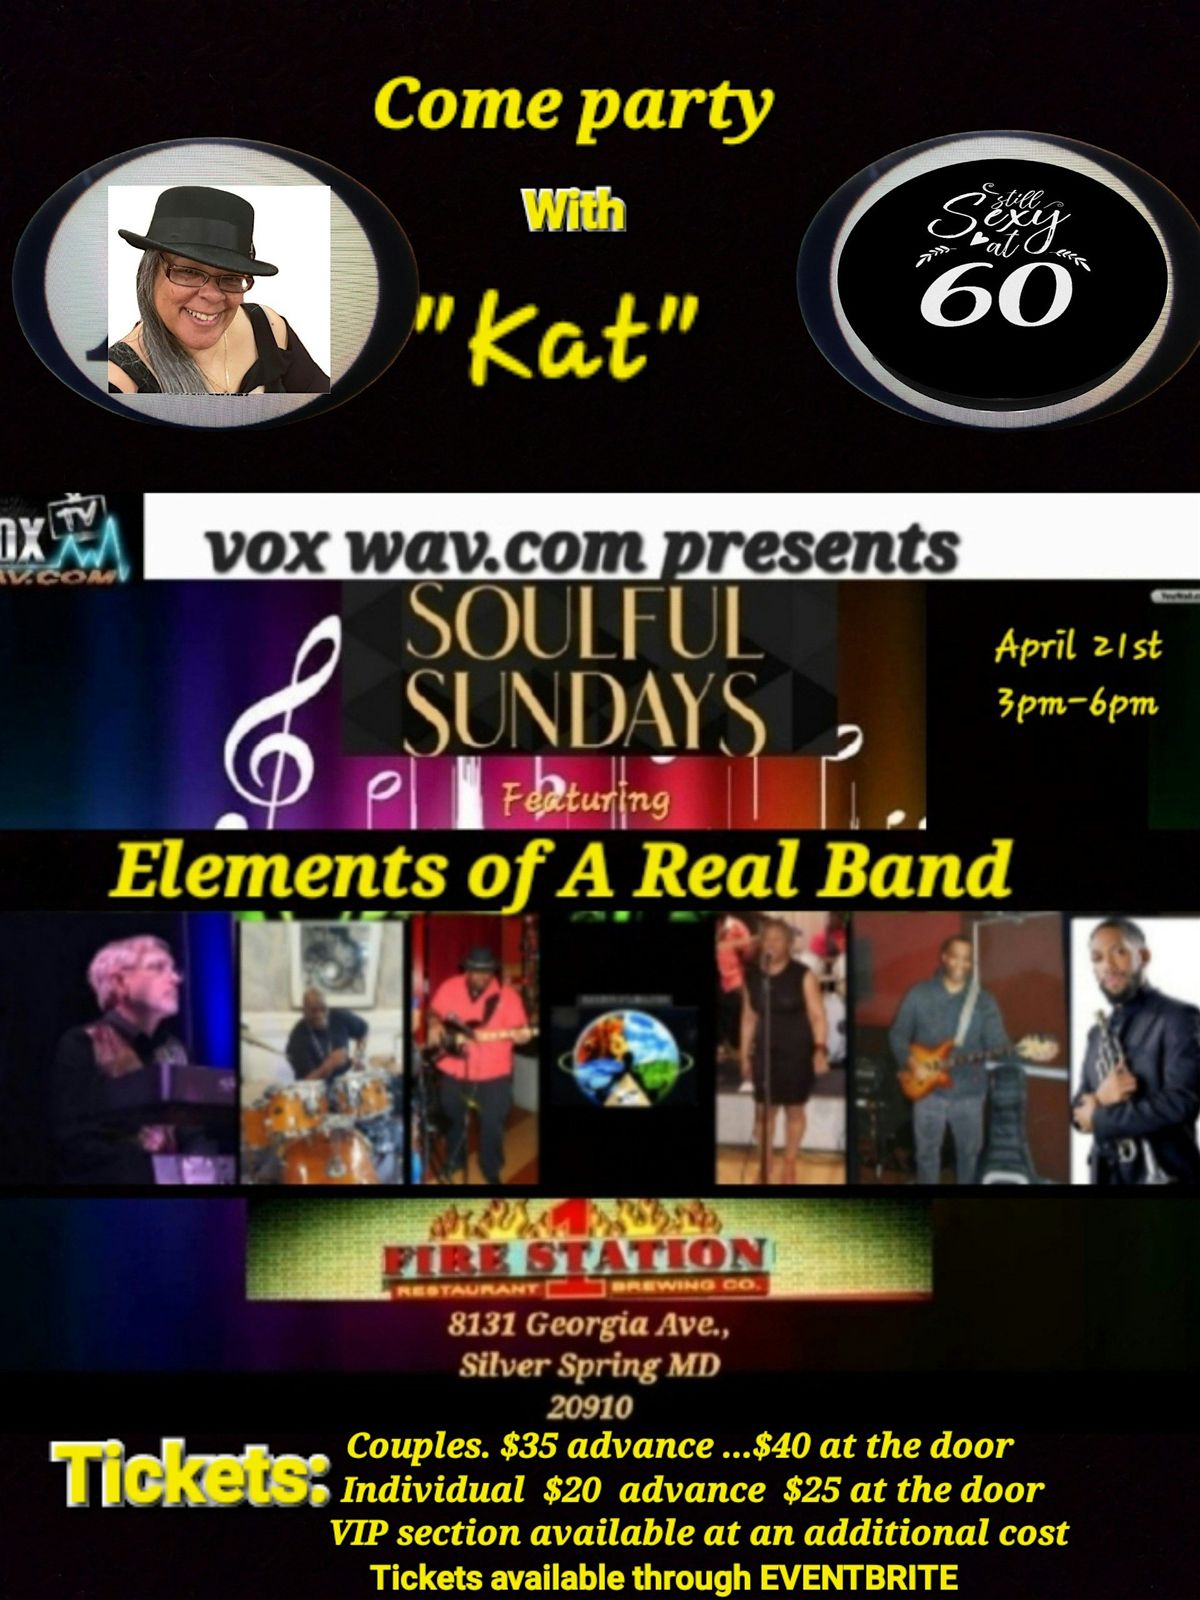 Soulfull Sunday With "Elements of A Real Band"